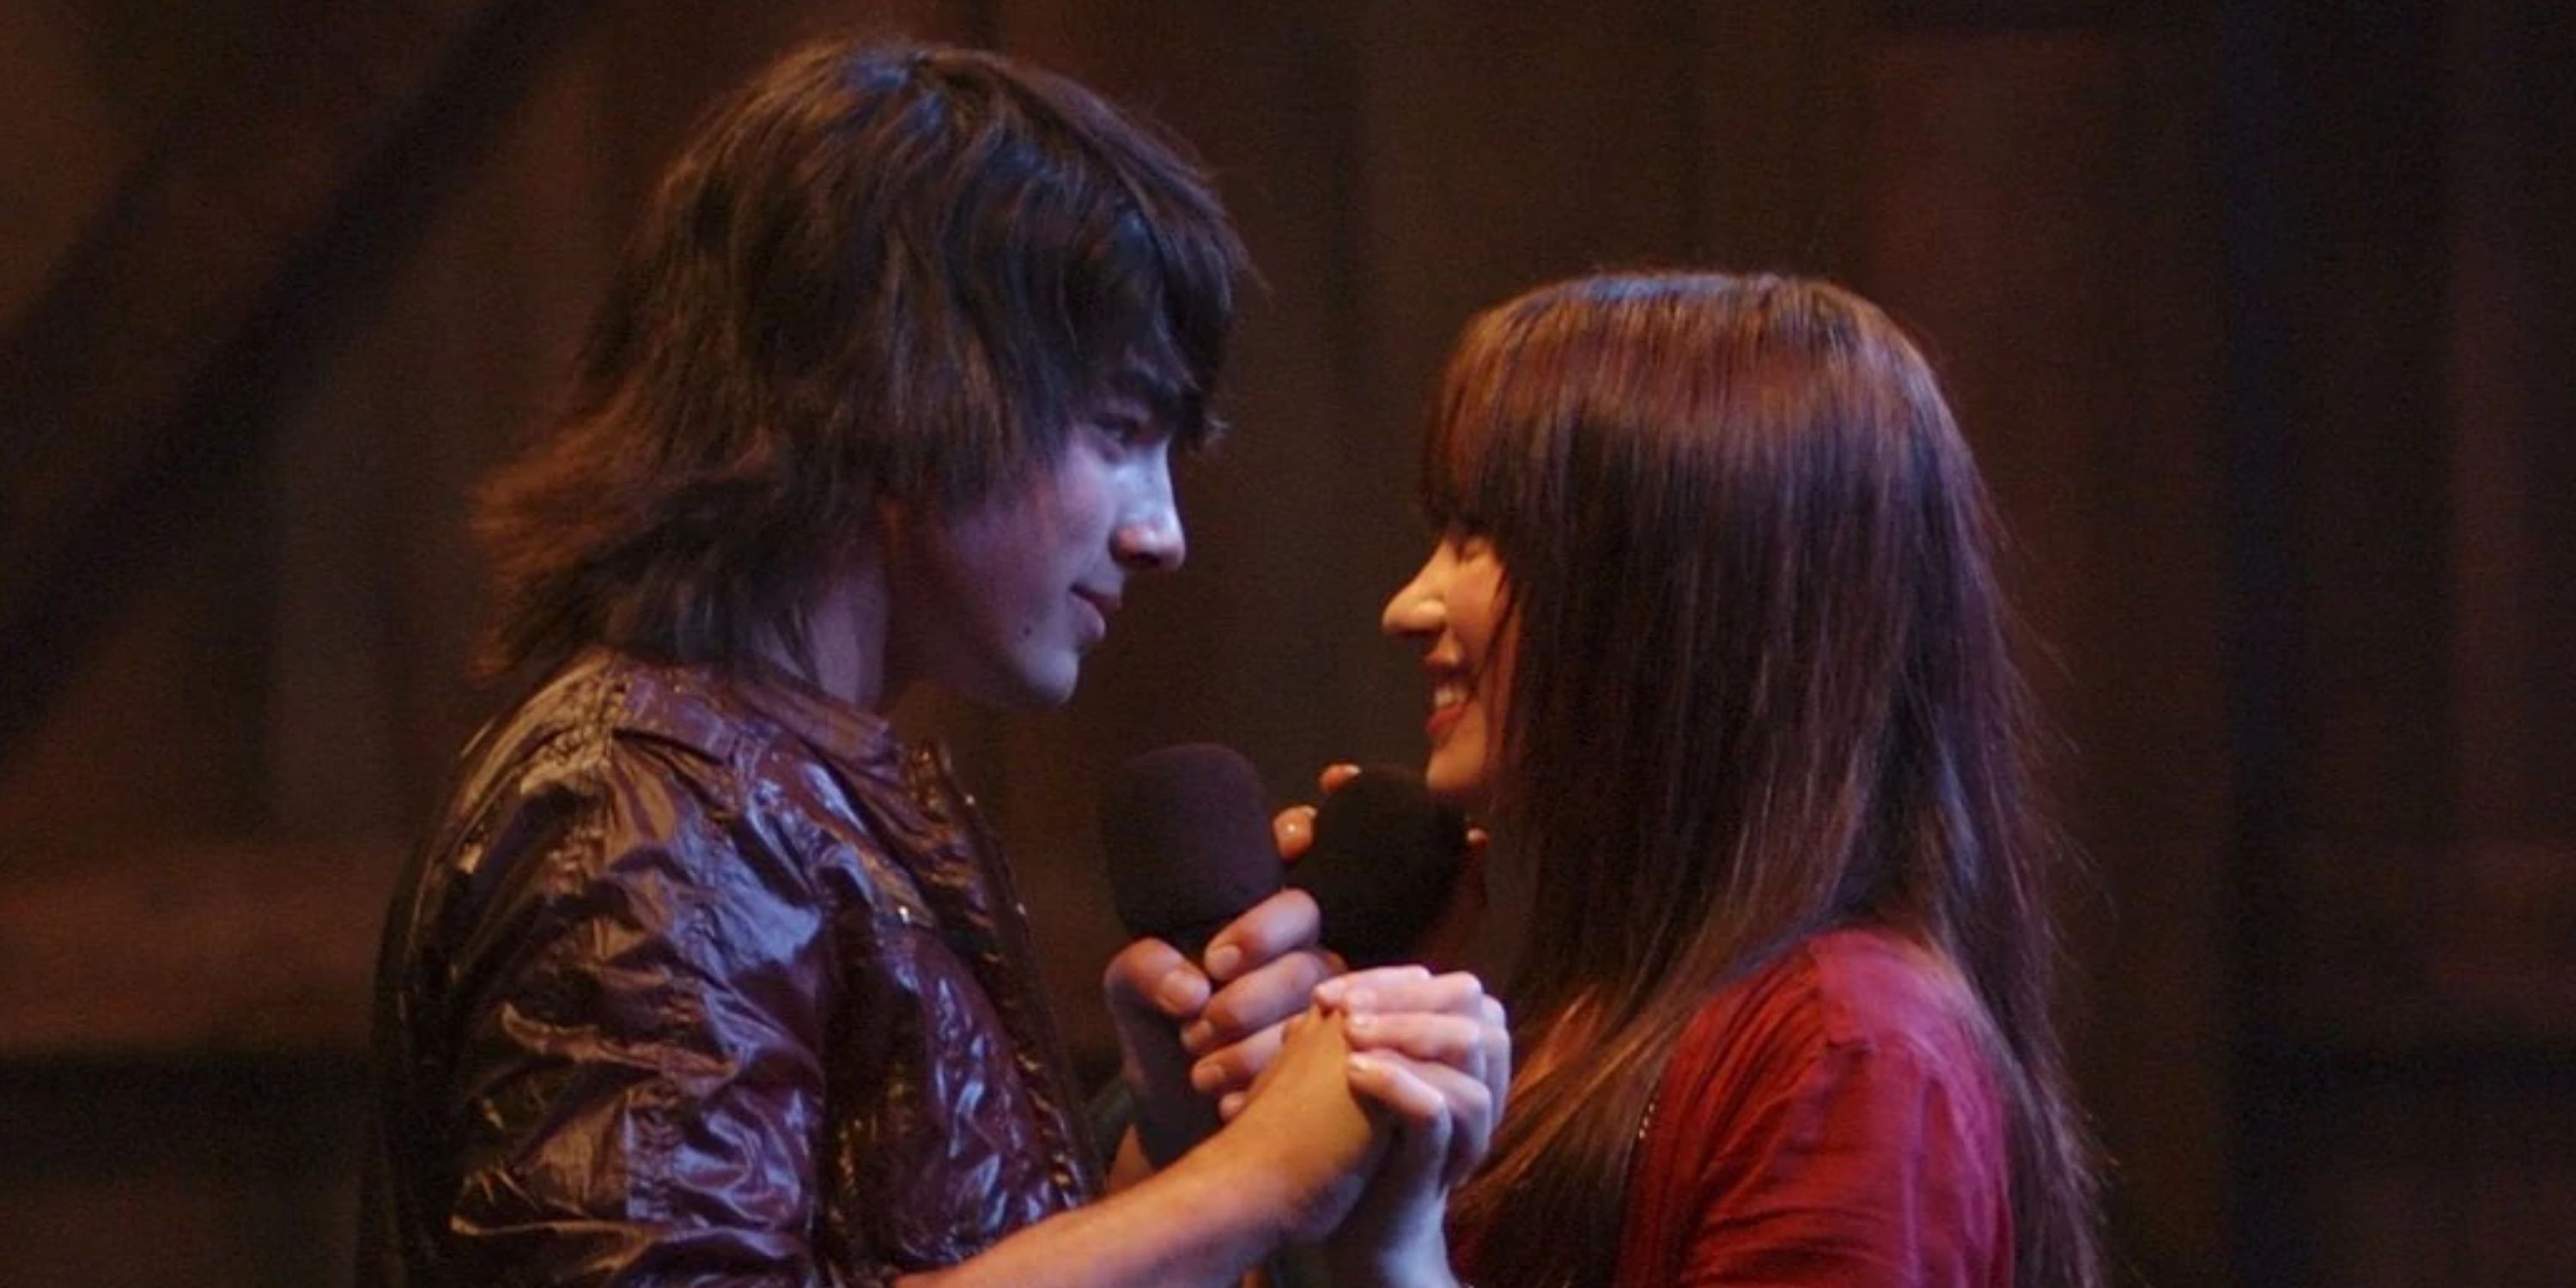 Shane & Mitchie holding hands close together after singing in Camp Rock